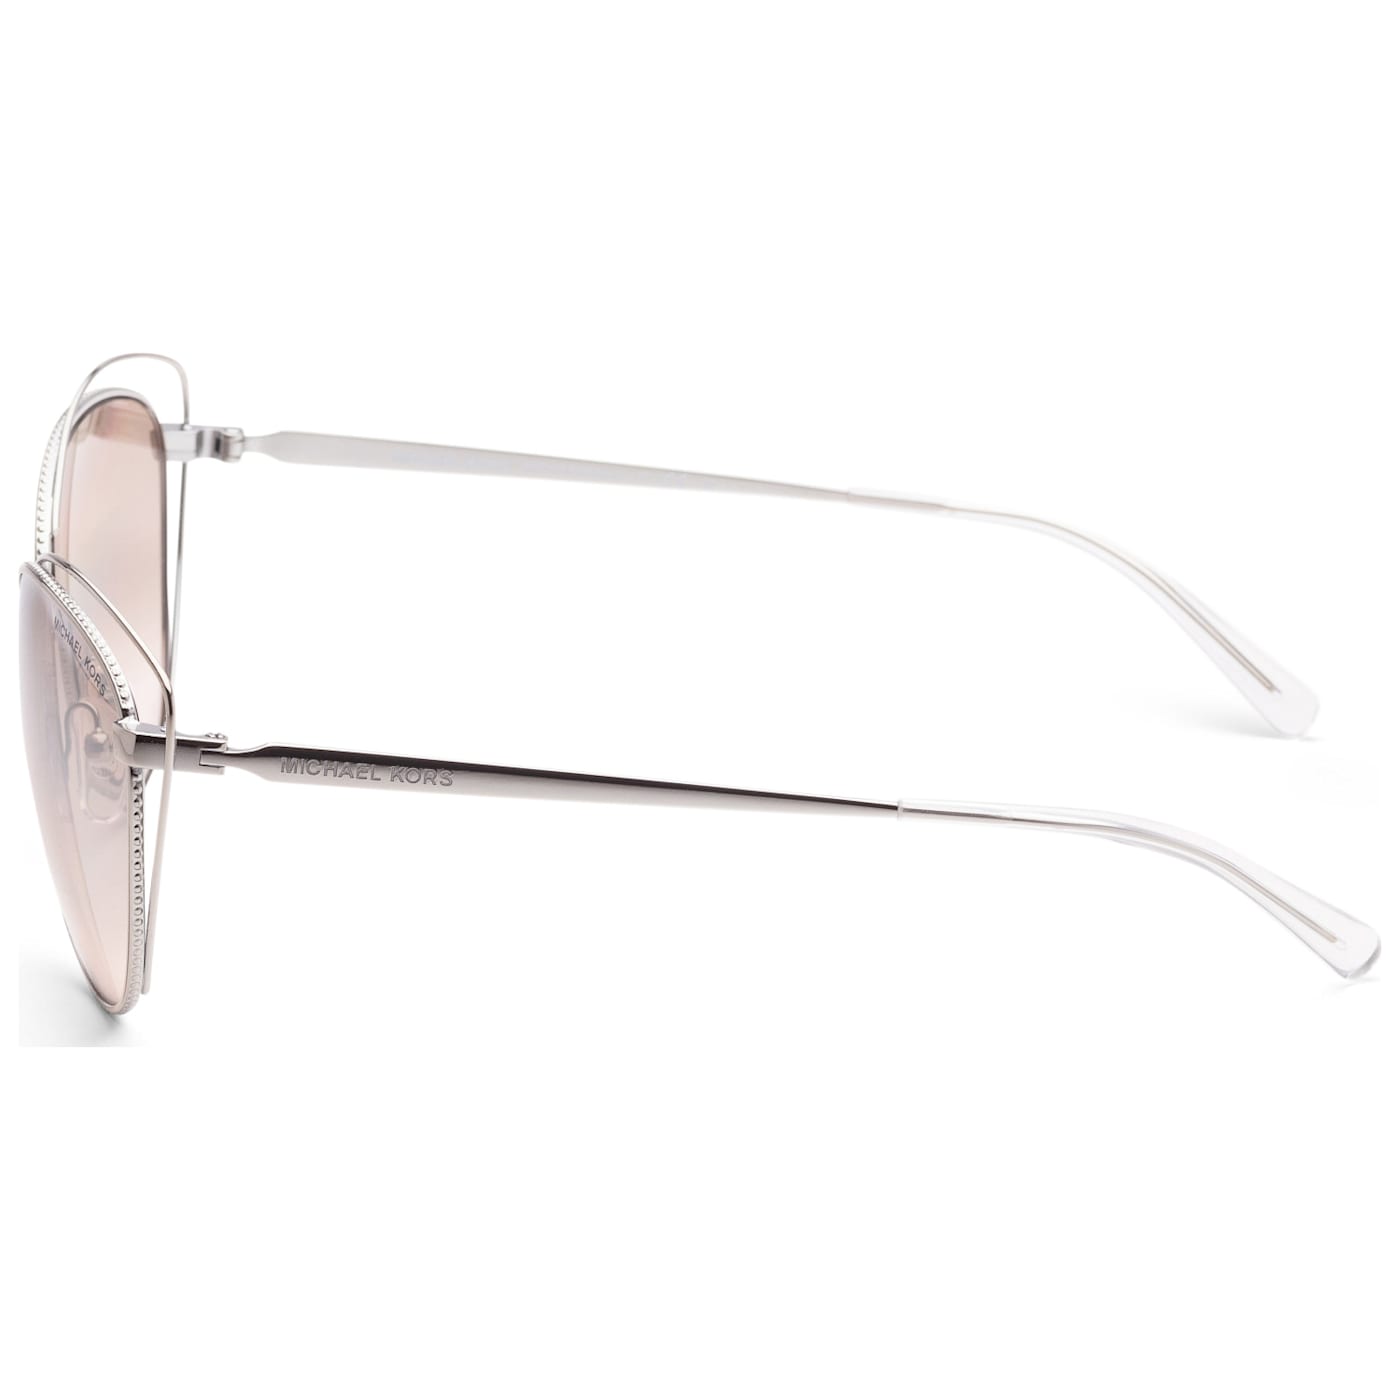 Tory Burch Pink & Silvertone Gradient Cat-Eye Sunglasses, Best Price and  Reviews